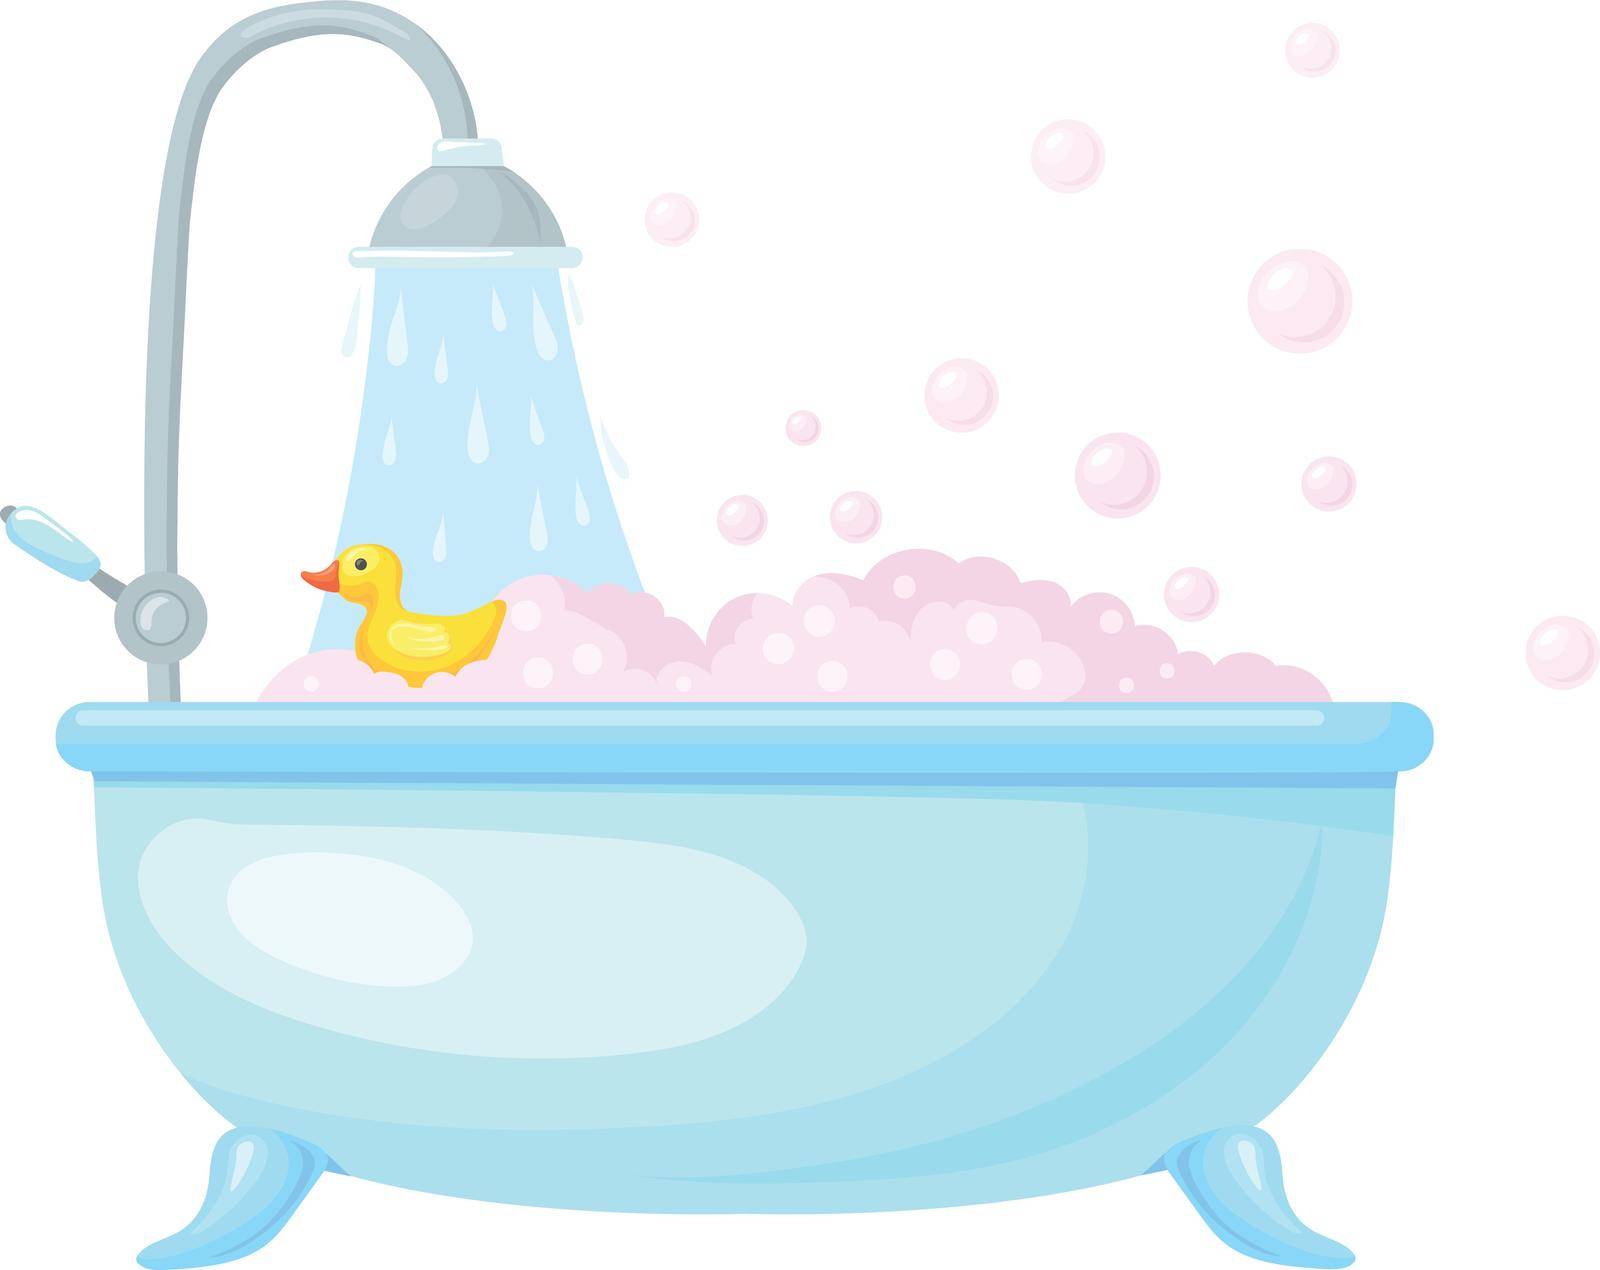 Full bath with bubbles and yellow duck. Cartoon bathtub icon isolated on white background